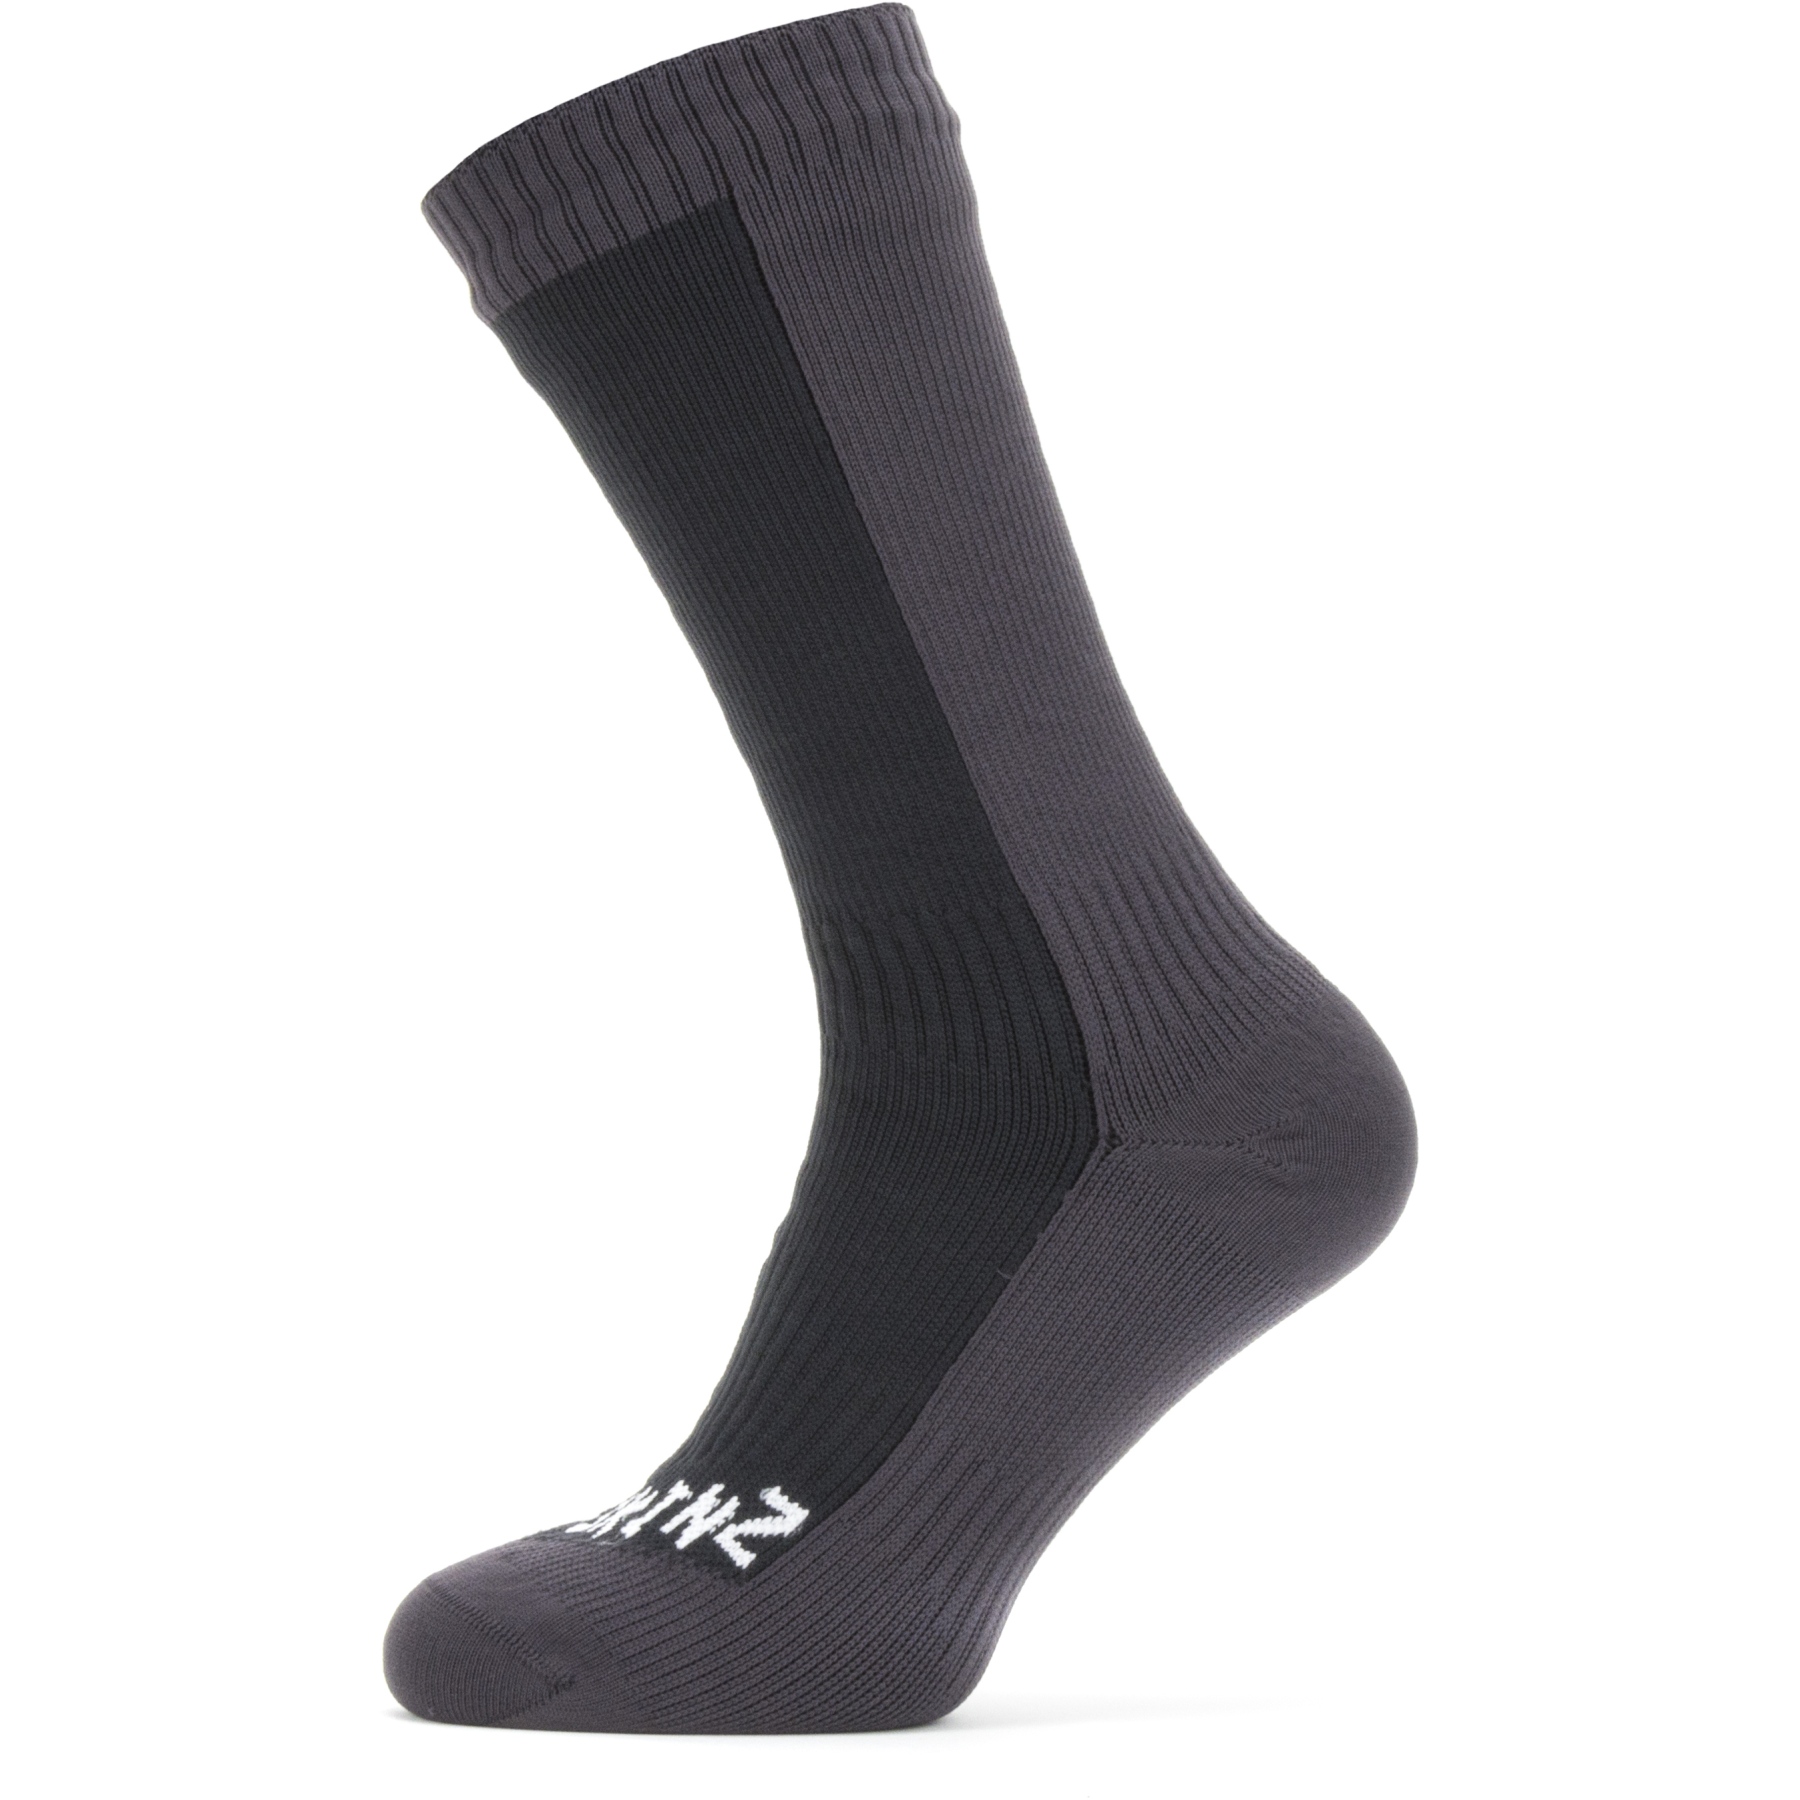 Foto de SealSkinz Calcetines Medianos Impermeables - Starston Cold Weather - Negro/Gris